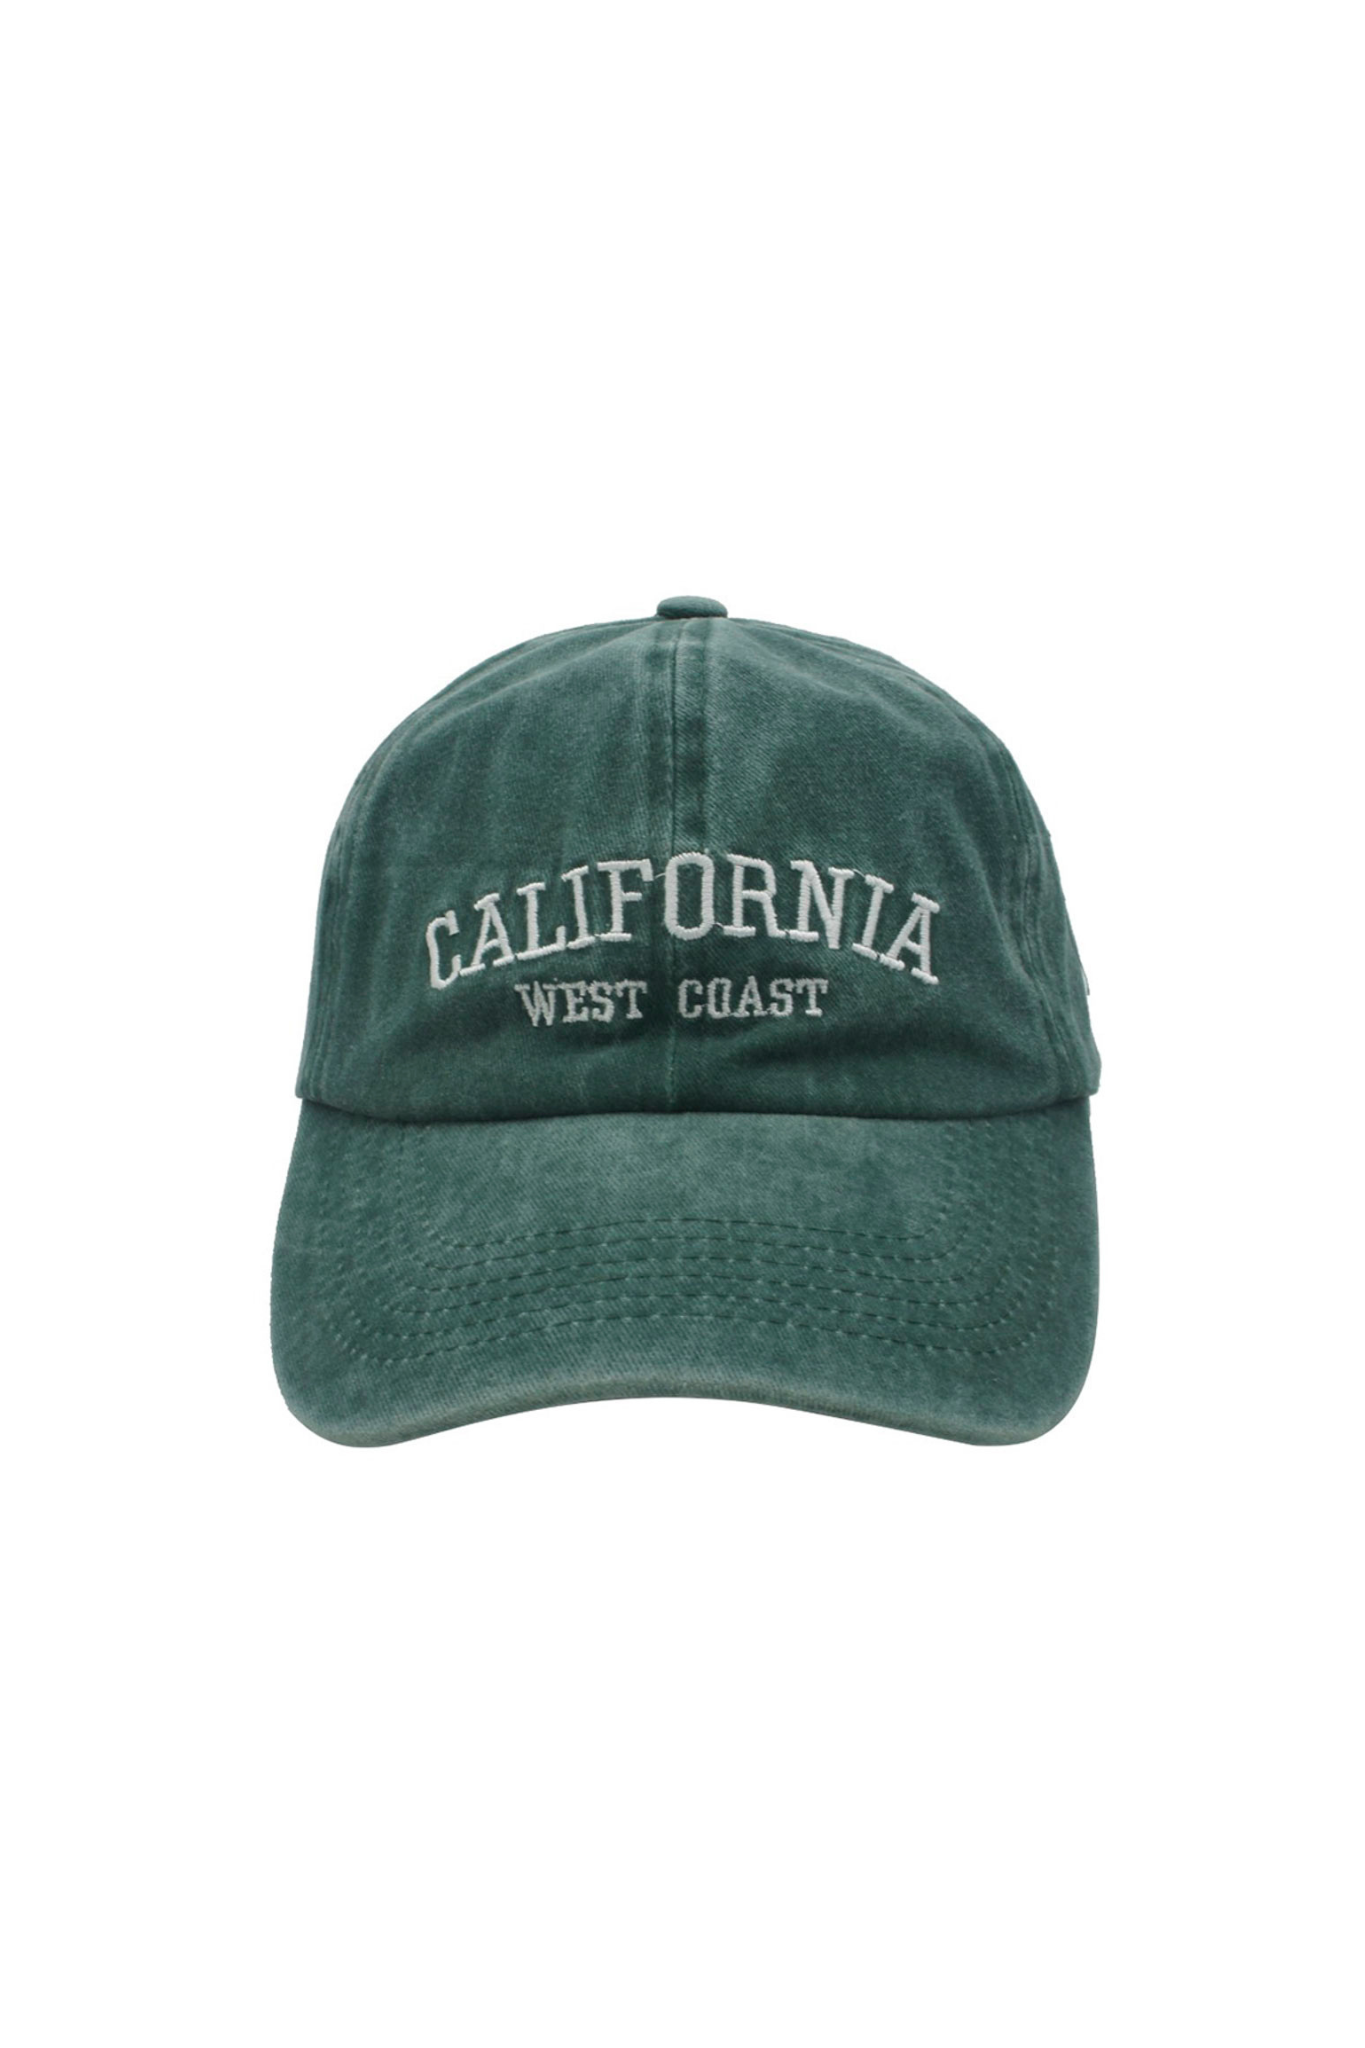 California West Coast Washed Cap in Forest Green